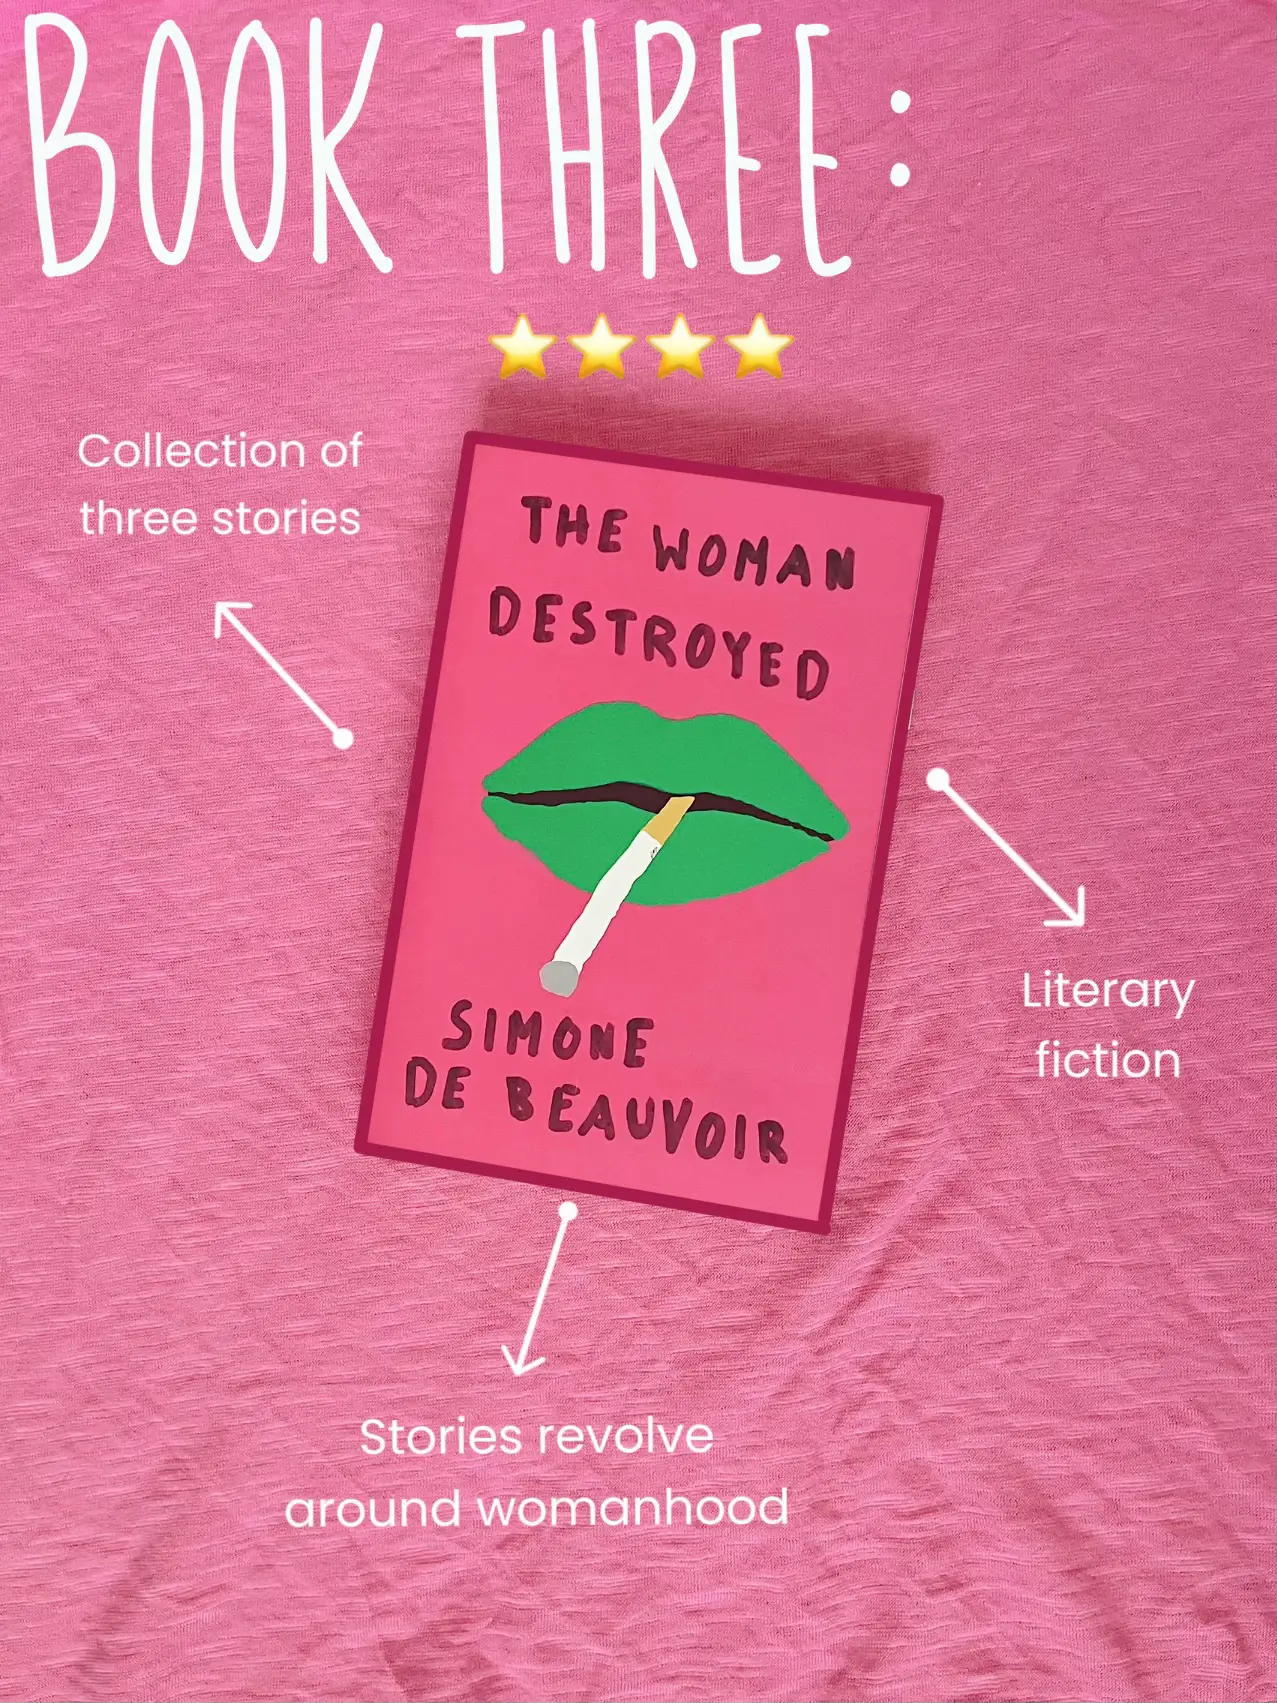 Pink & Red Book Stack – Life According to Jamie